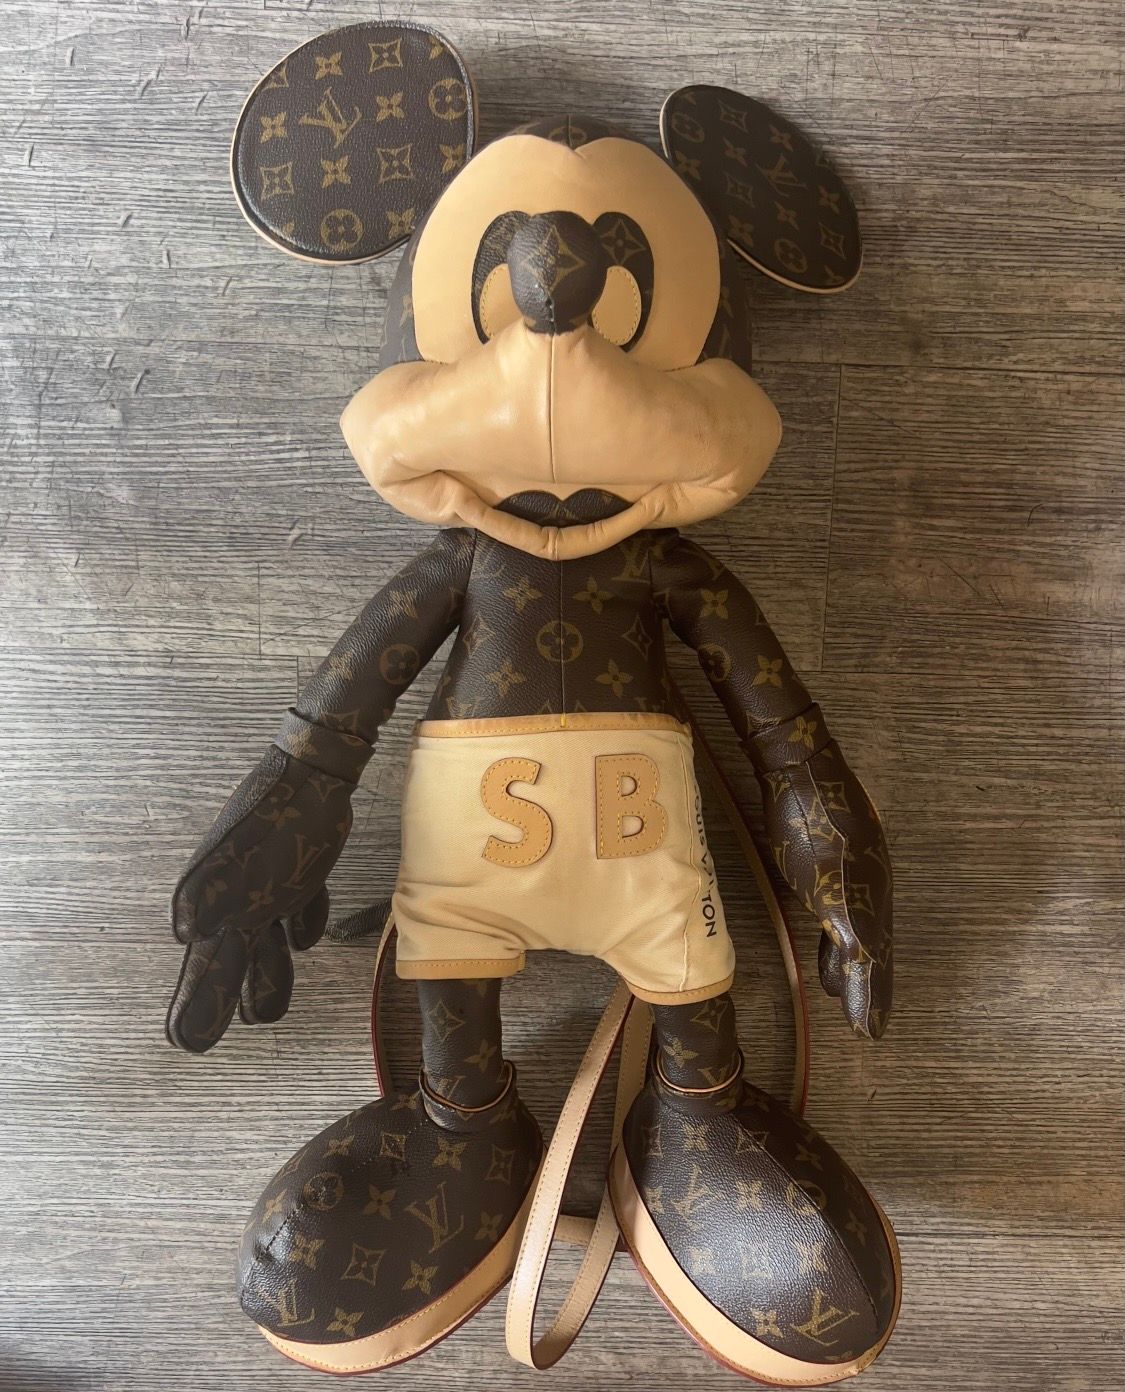 Sheron Barber on X: What are your thoughts on this Mickey Mouse